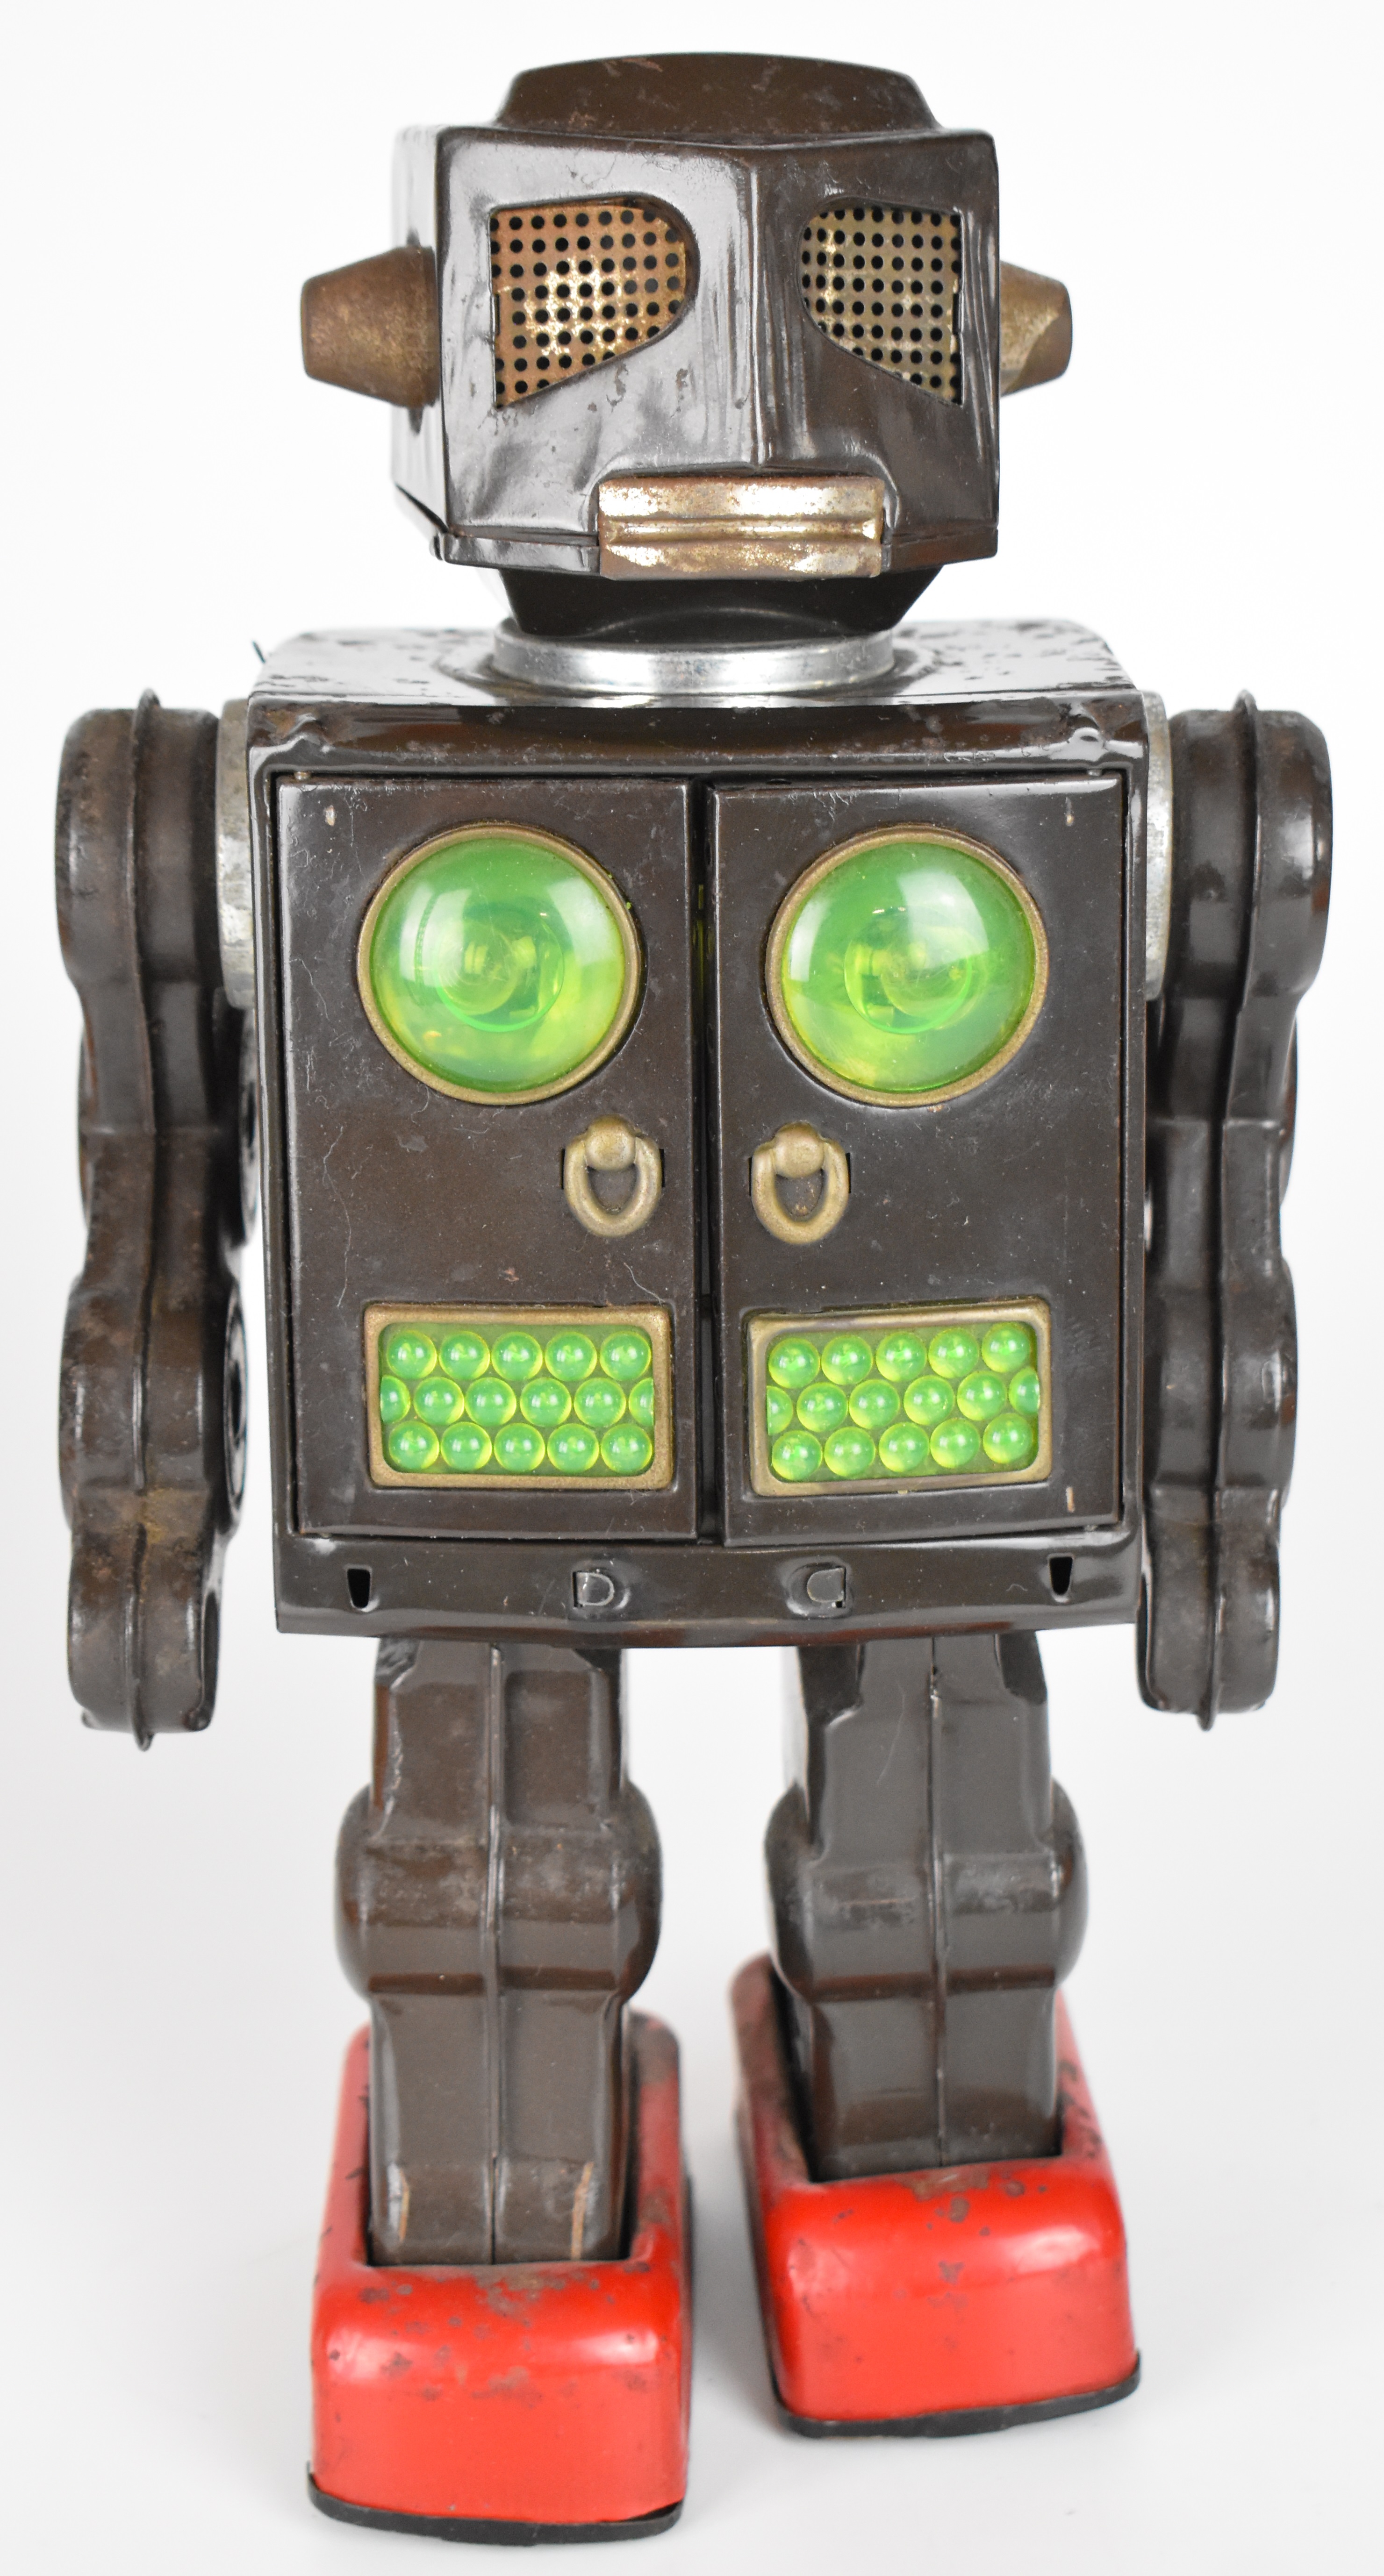 Japanese battery operated tinplate 'Attacking Martian' robot by Horikawa (SH Toys), height 28cm, - Image 2 of 11